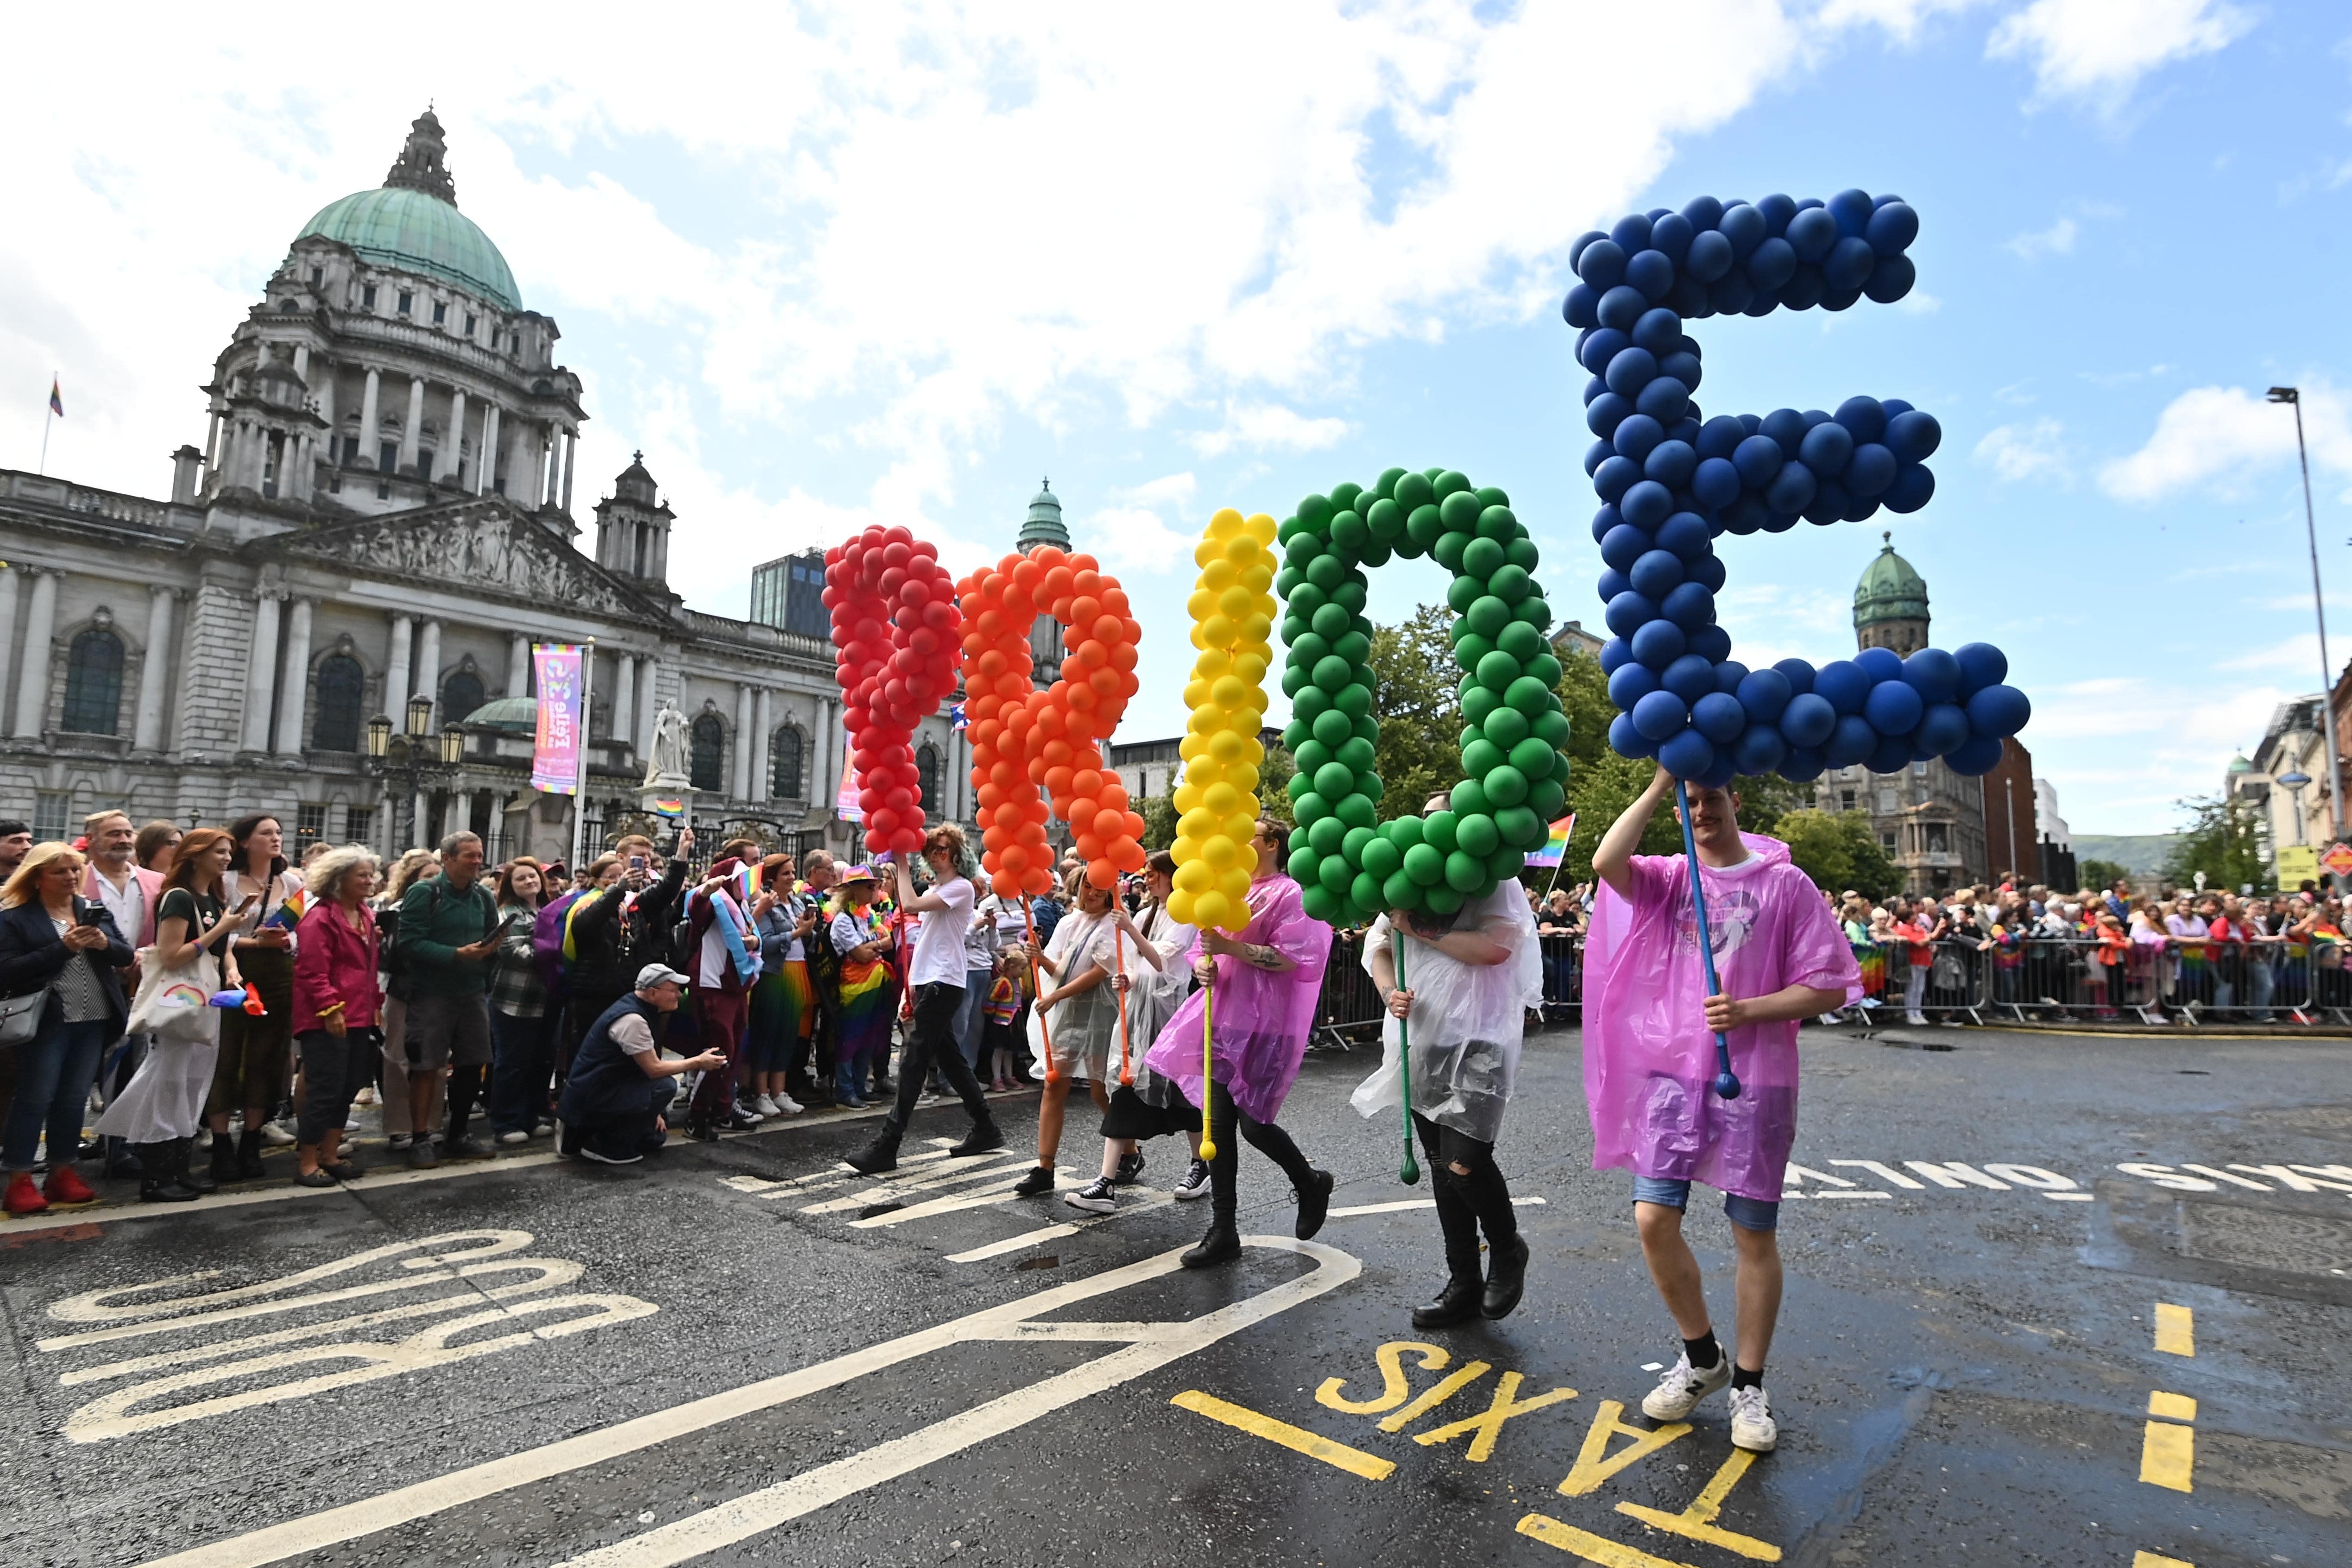 Belfast preacher claims comments at Pride event were taken out of context The Independent